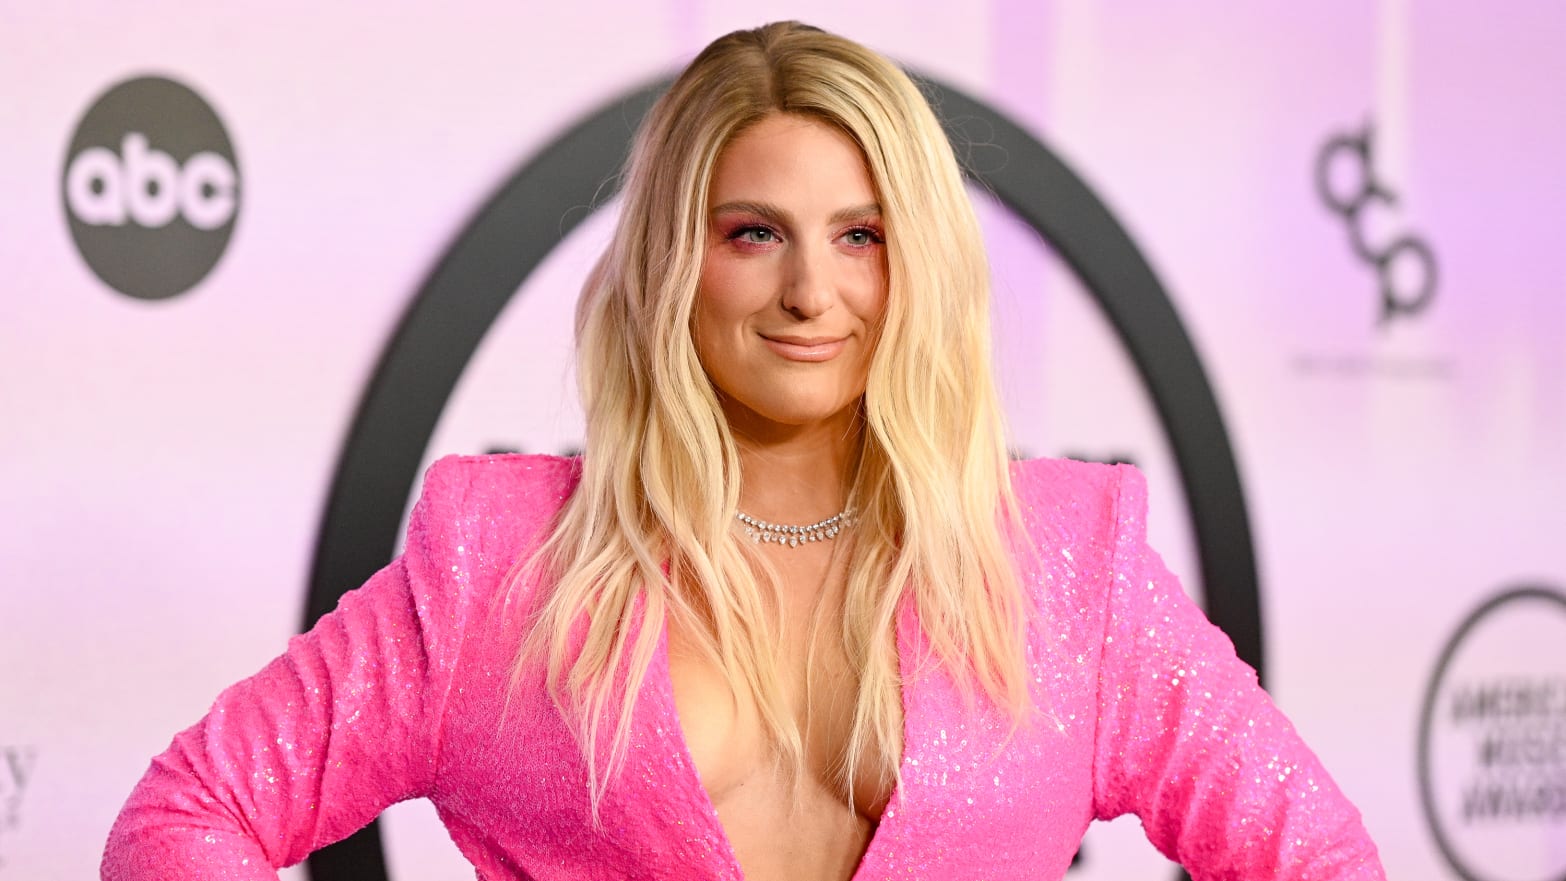 Made You Look' music video catches attention of Meghan Trainor